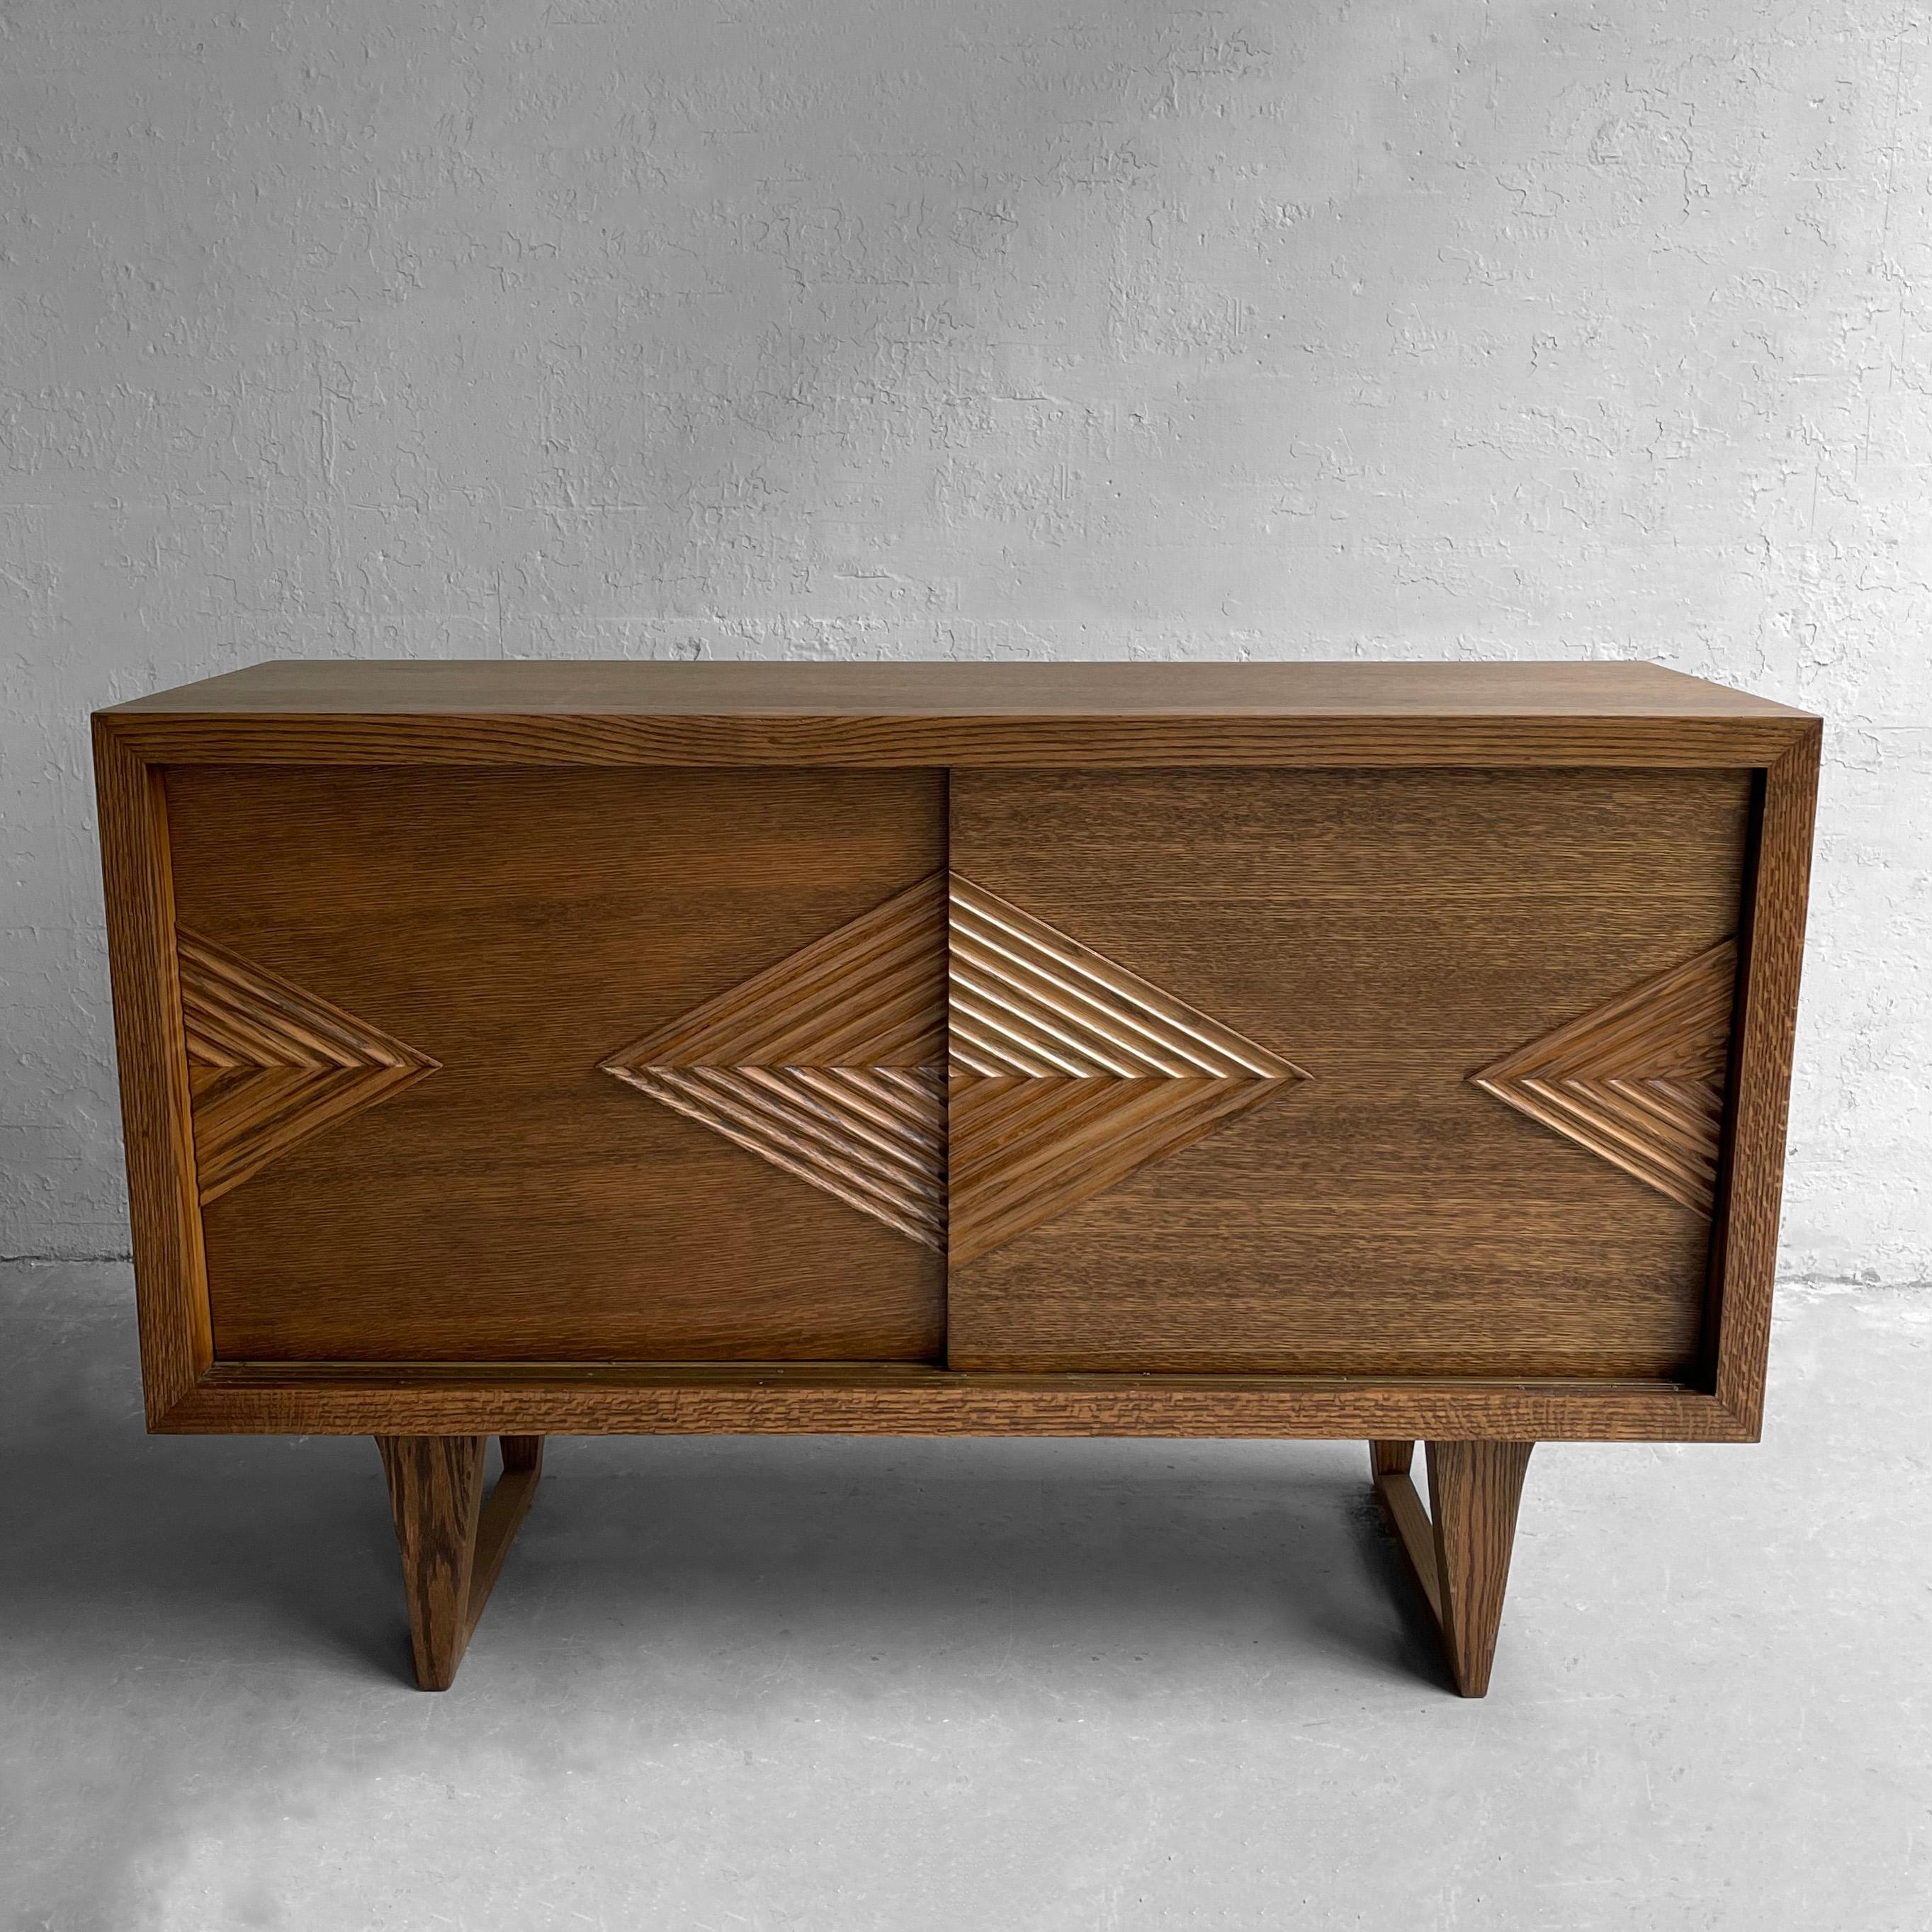 Midcentury Chevron Front Oak Sideboard Credenza In Good Condition For Sale In Brooklyn, NY